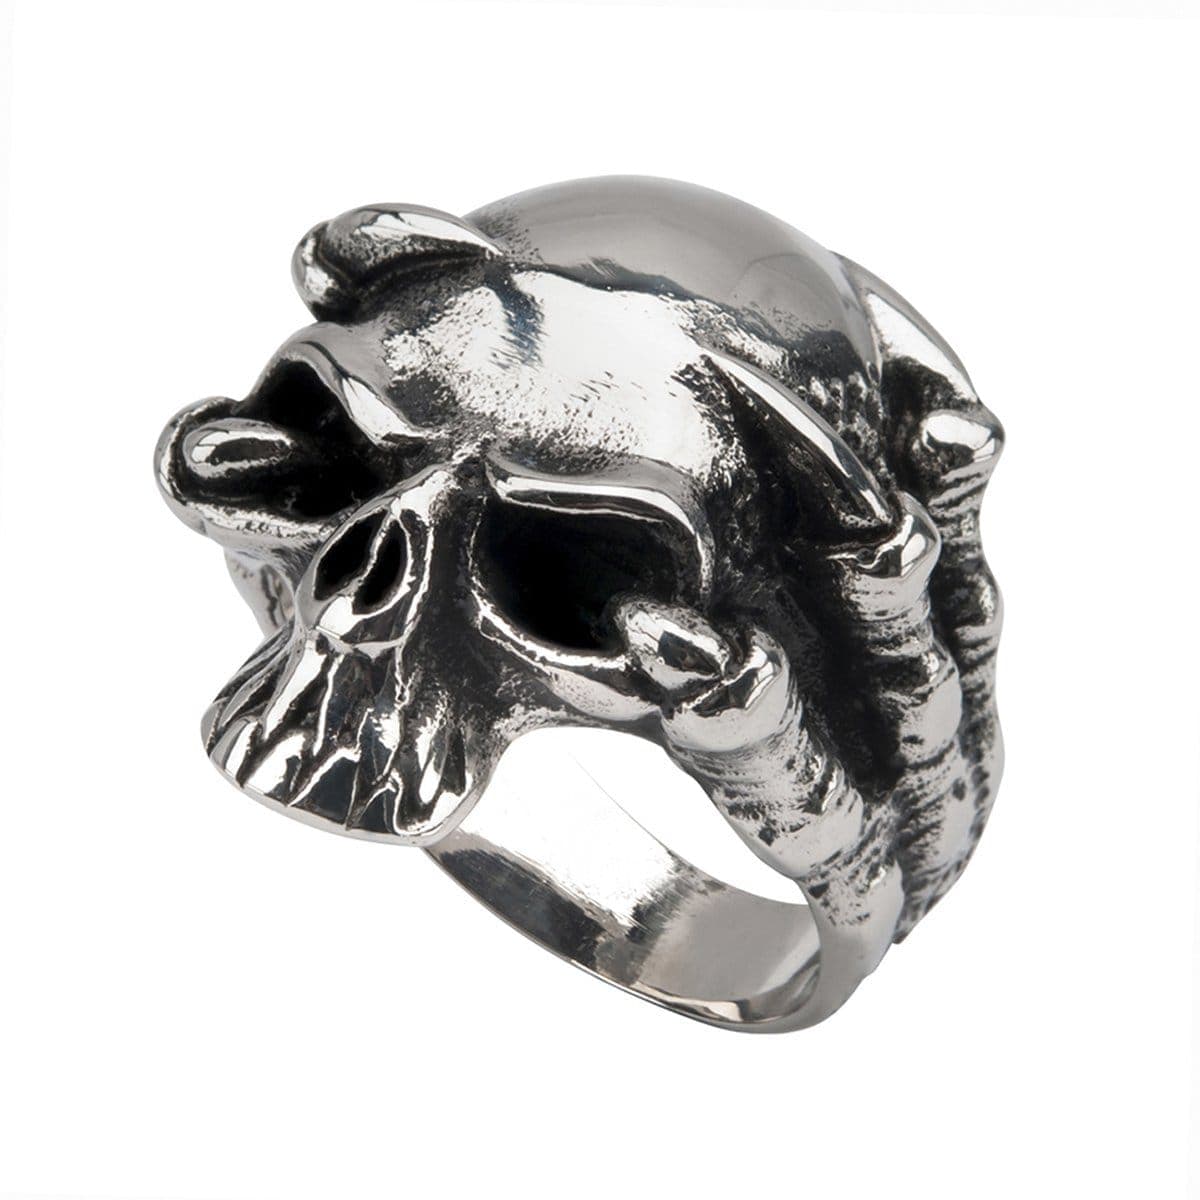 INOX JEWELRY Rings Antiqued Silver Tone Stainless Steel Claw-Grip Hallowed Jaw Skull Ring